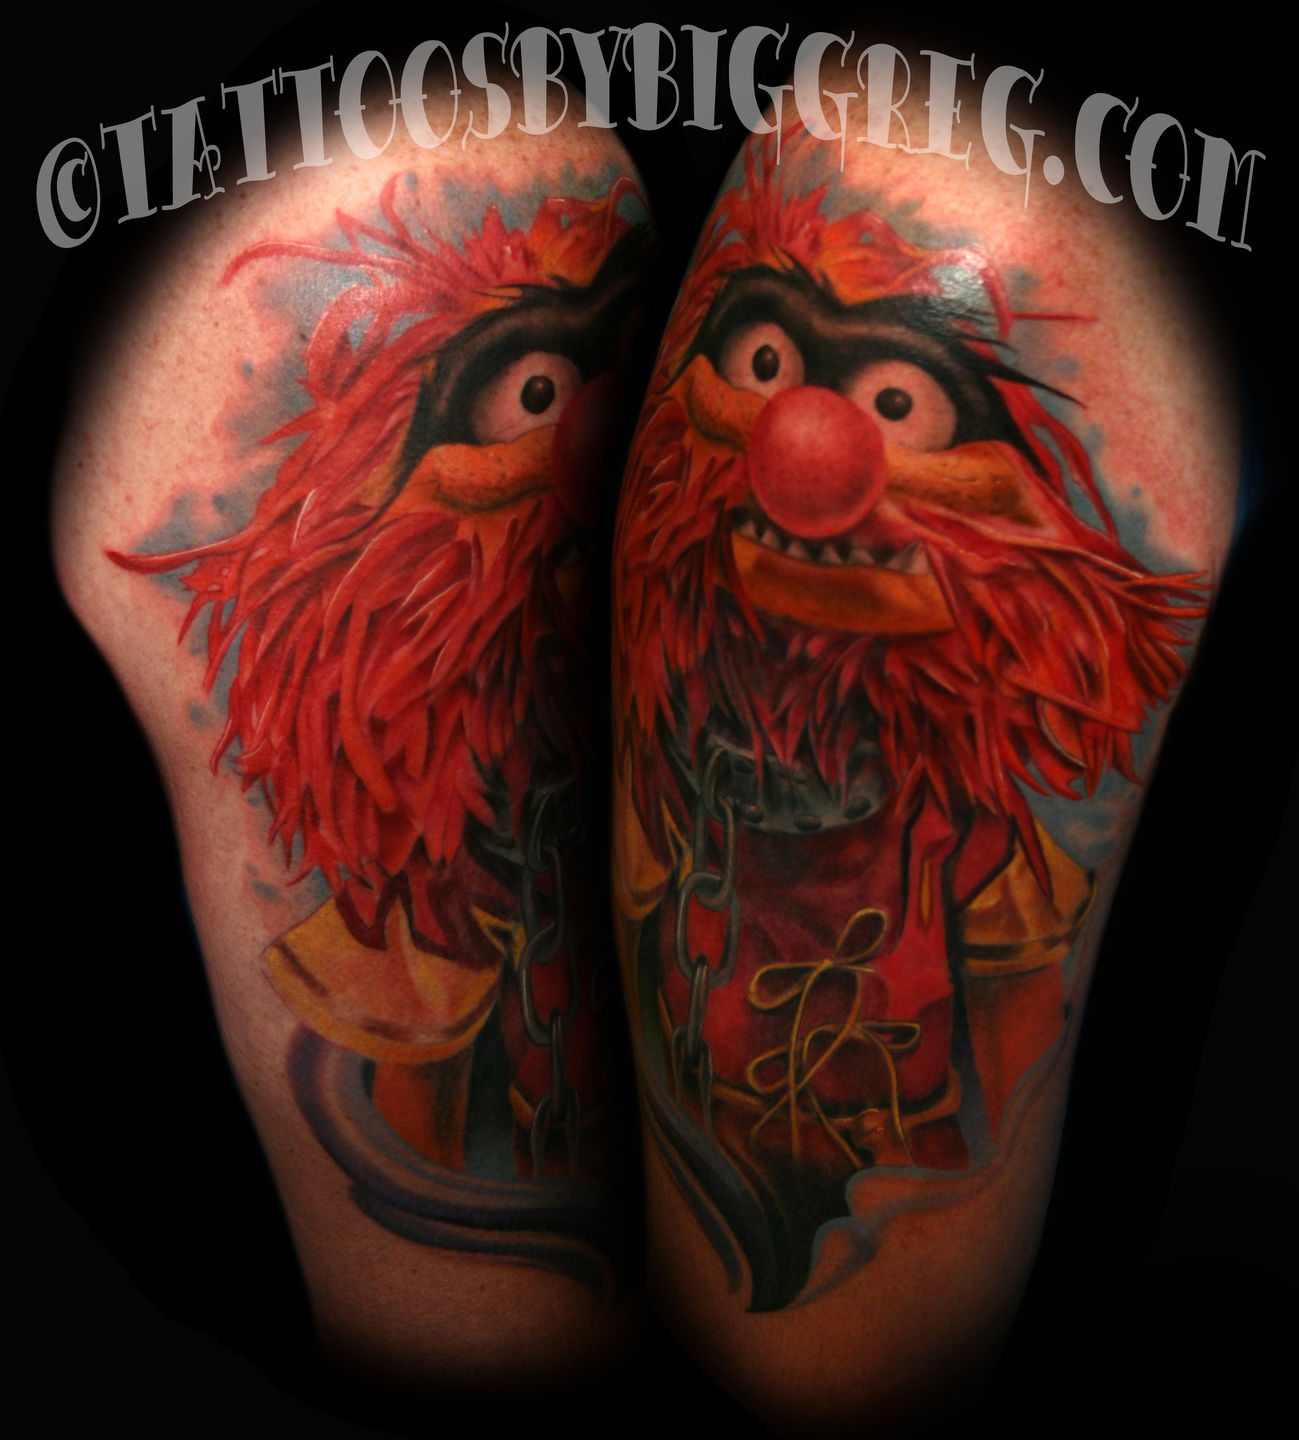 My Two Favorite Drummers Ringo Starr vs Animal from the Muppets by Mat  Rule at Yesyes Body Staff in Paris  rtattoos